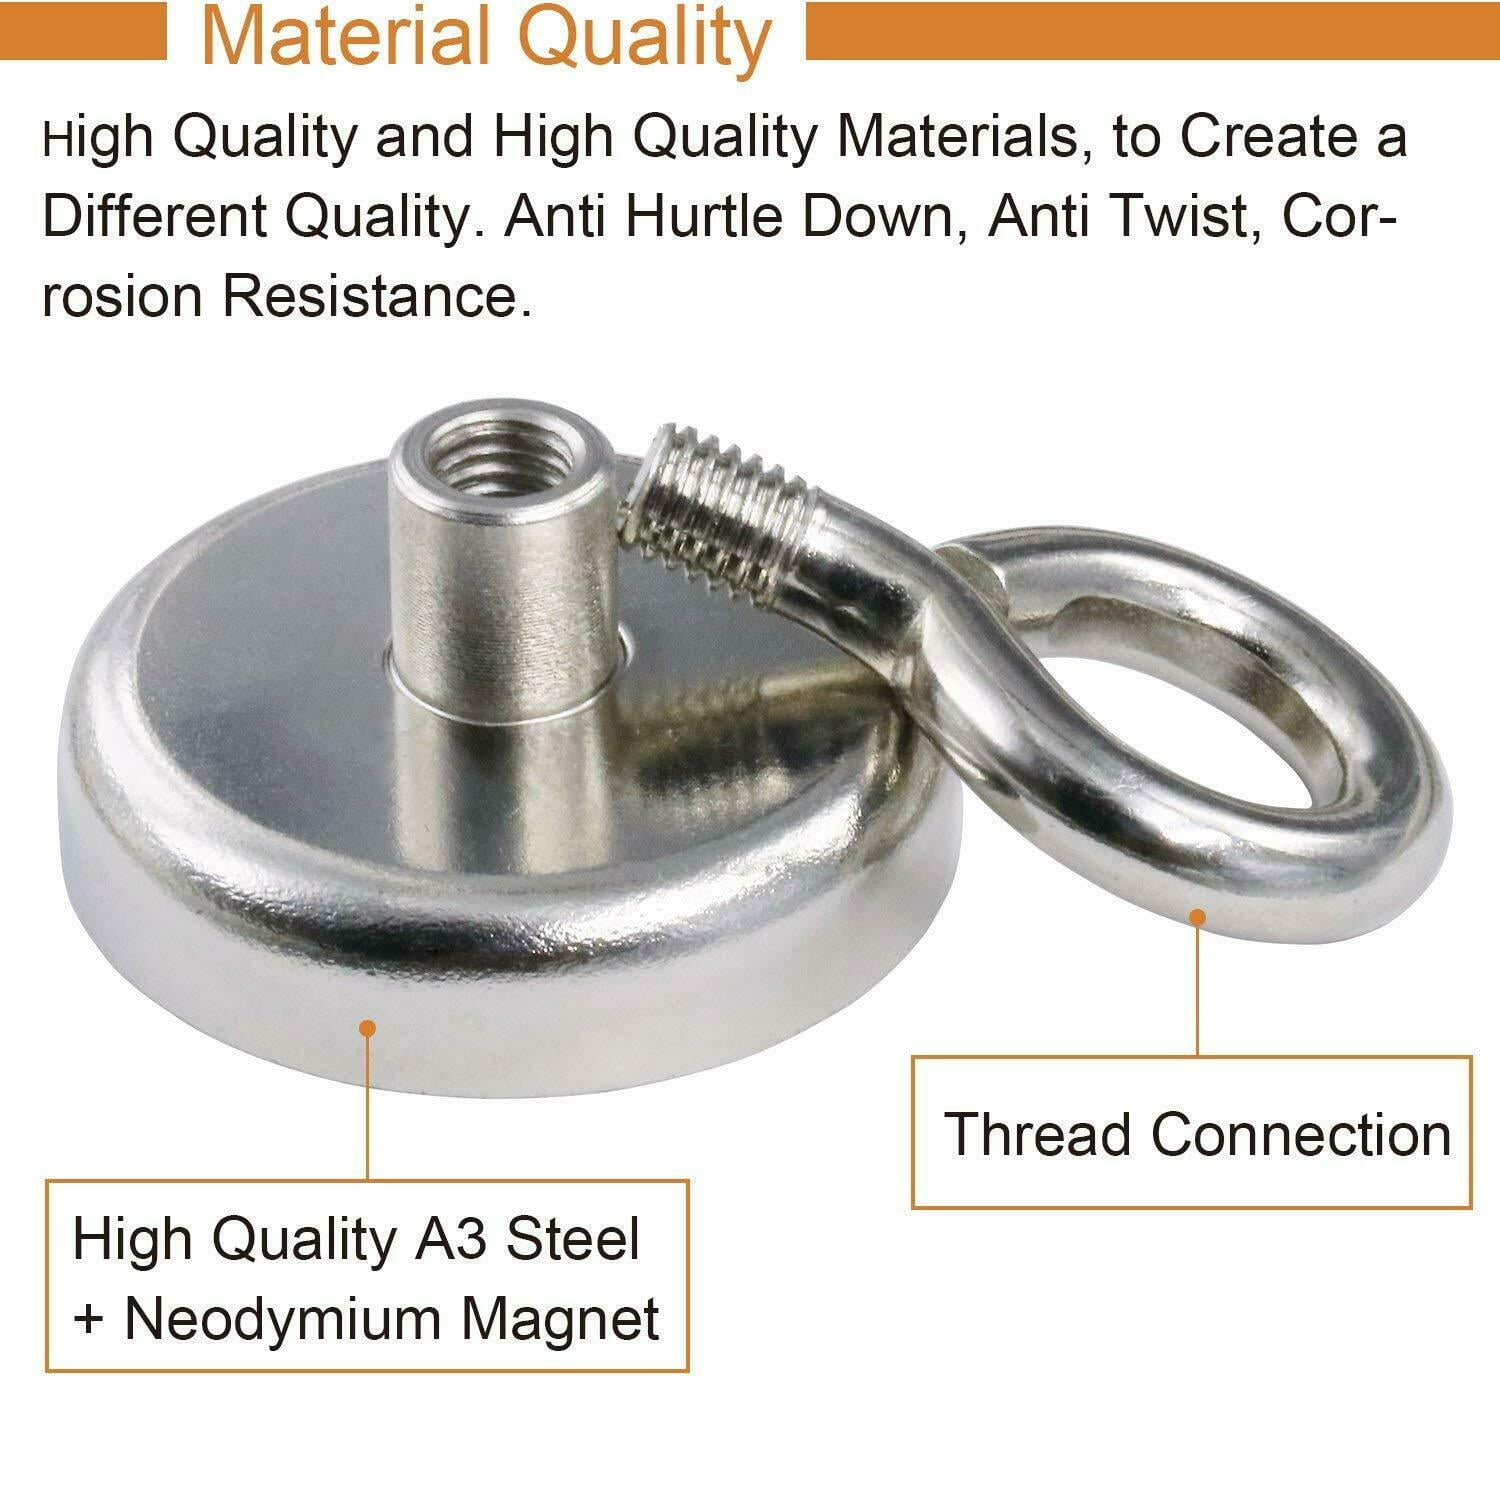 Pulling Force Super Powerful N52 Round Neodymium Magnet with Countersunk Hole and Eyebolt Diameter,Super Powerful Diameter 2.36 X Thickness 0.59 Great for Magnet Fishing 